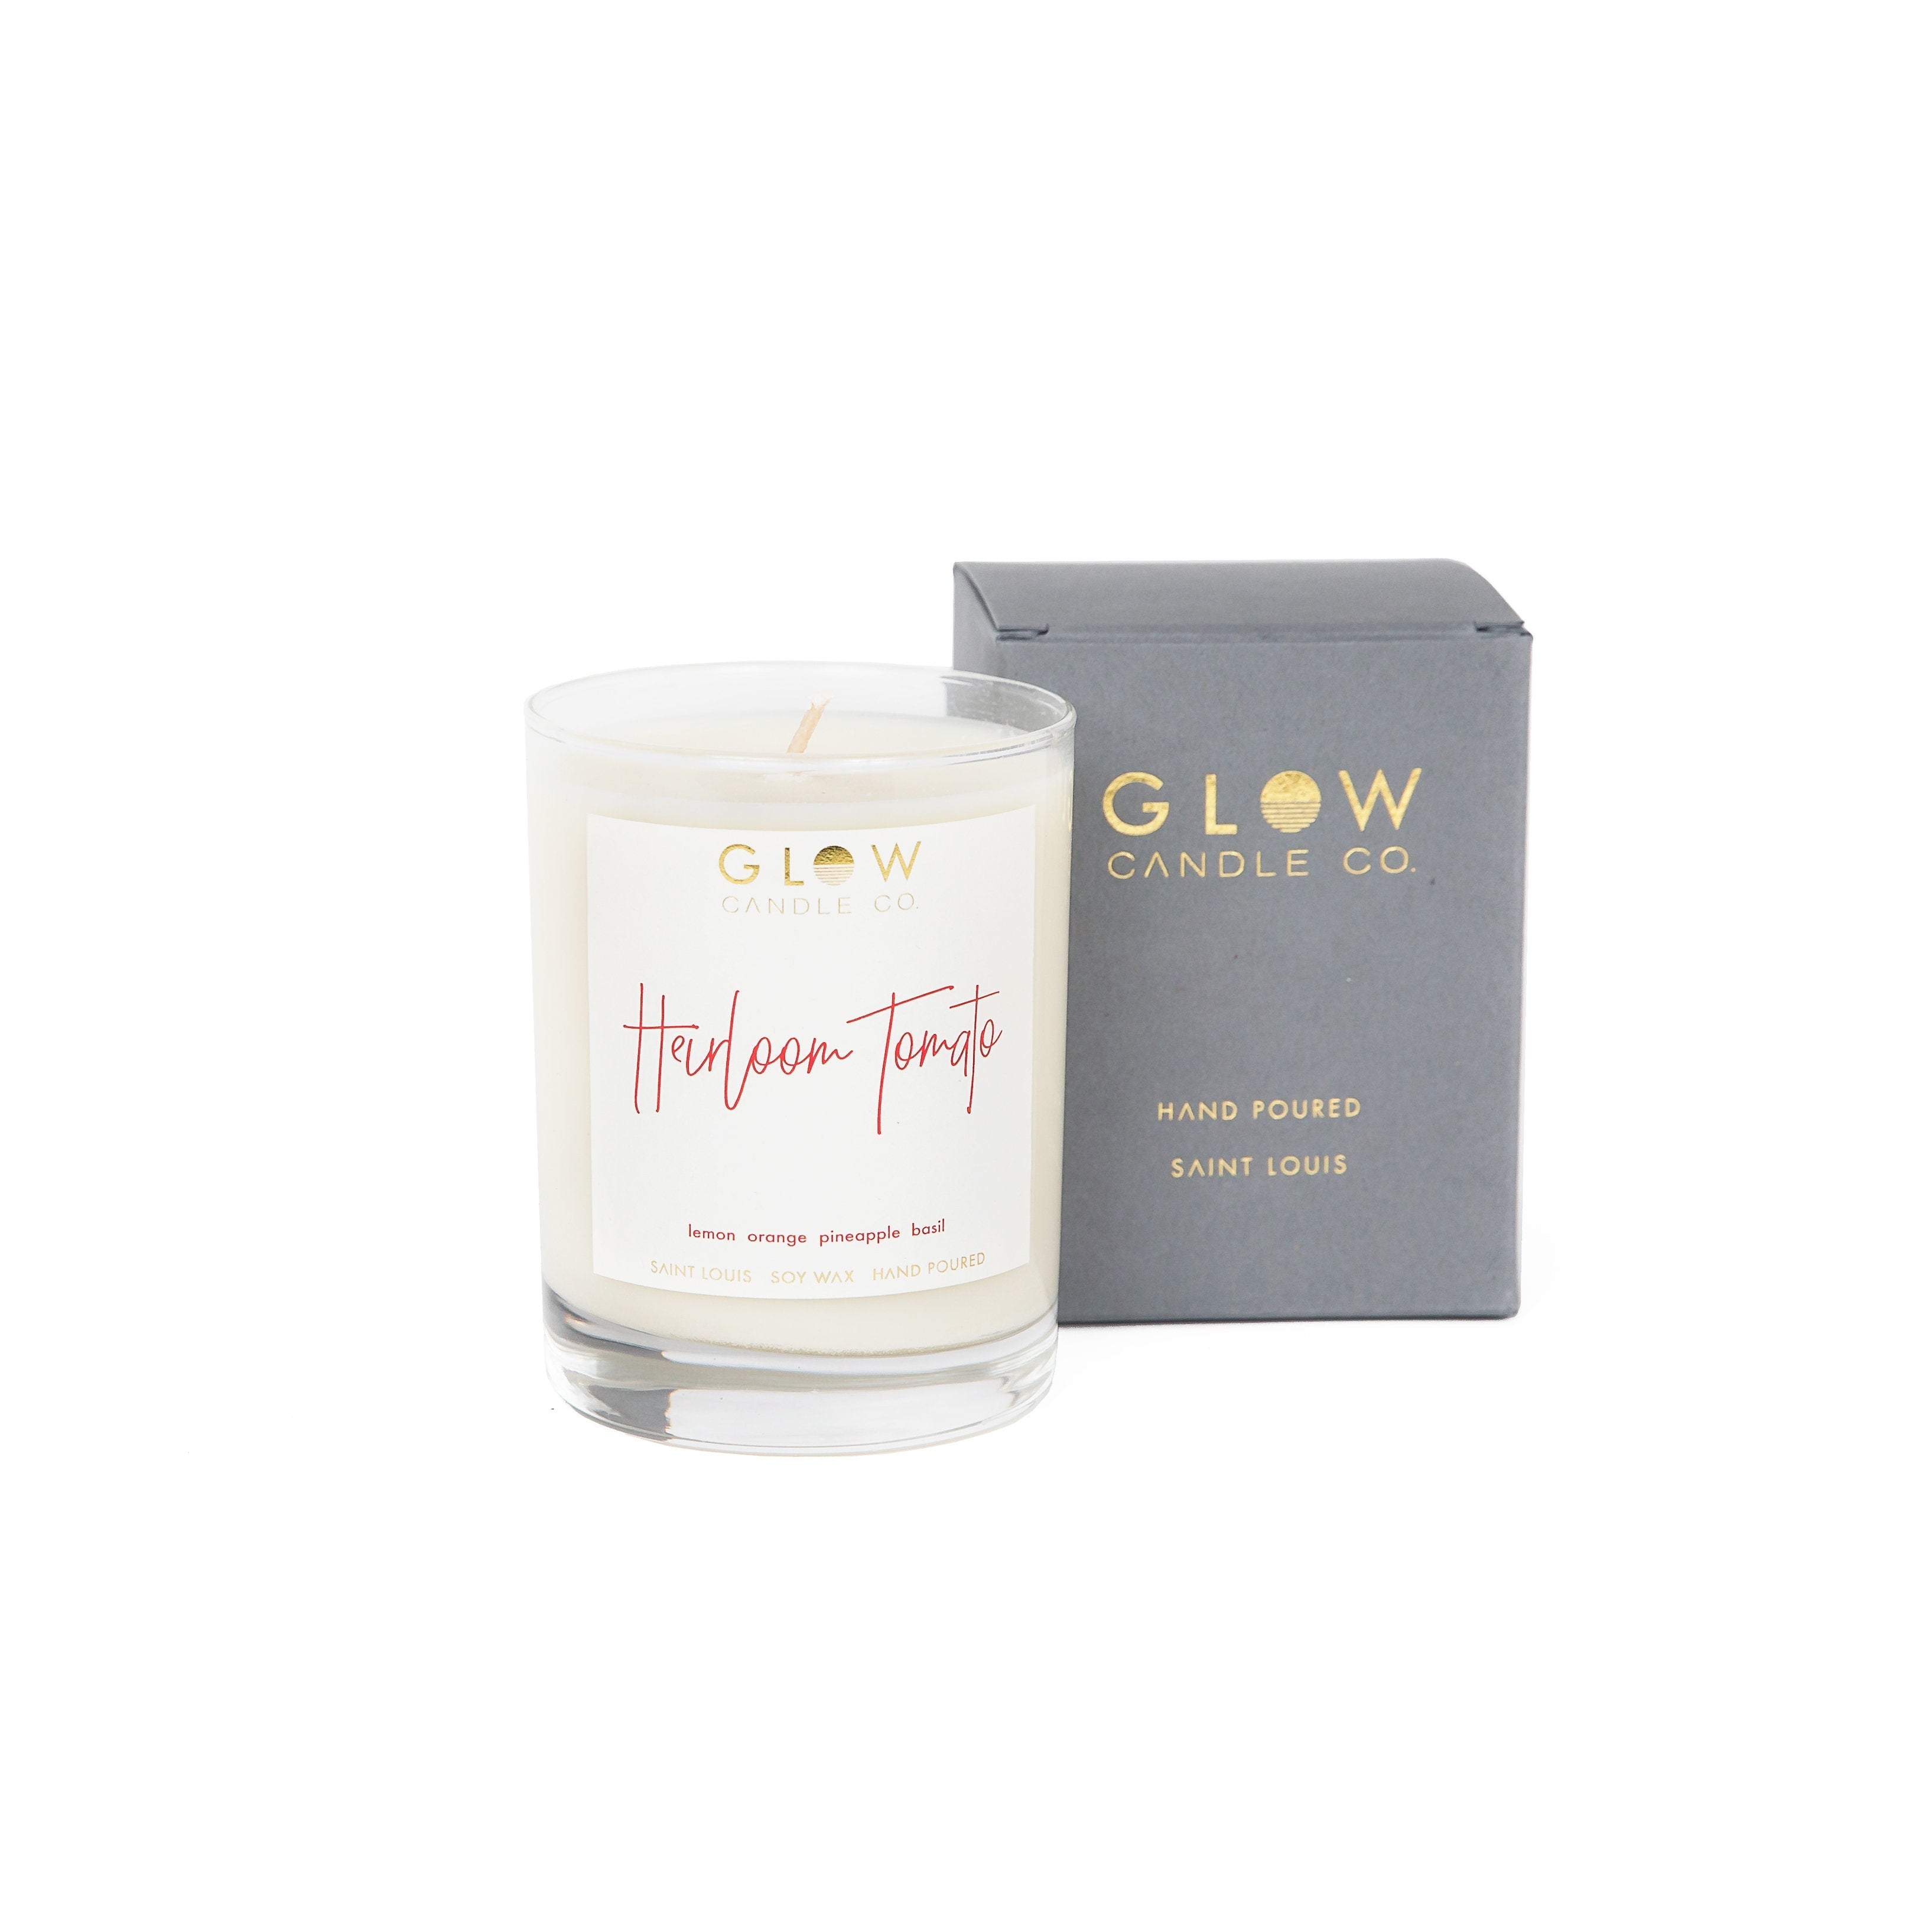  Heirloom Tomato by Glow Candle Company Glow Candle Company Perfumarie